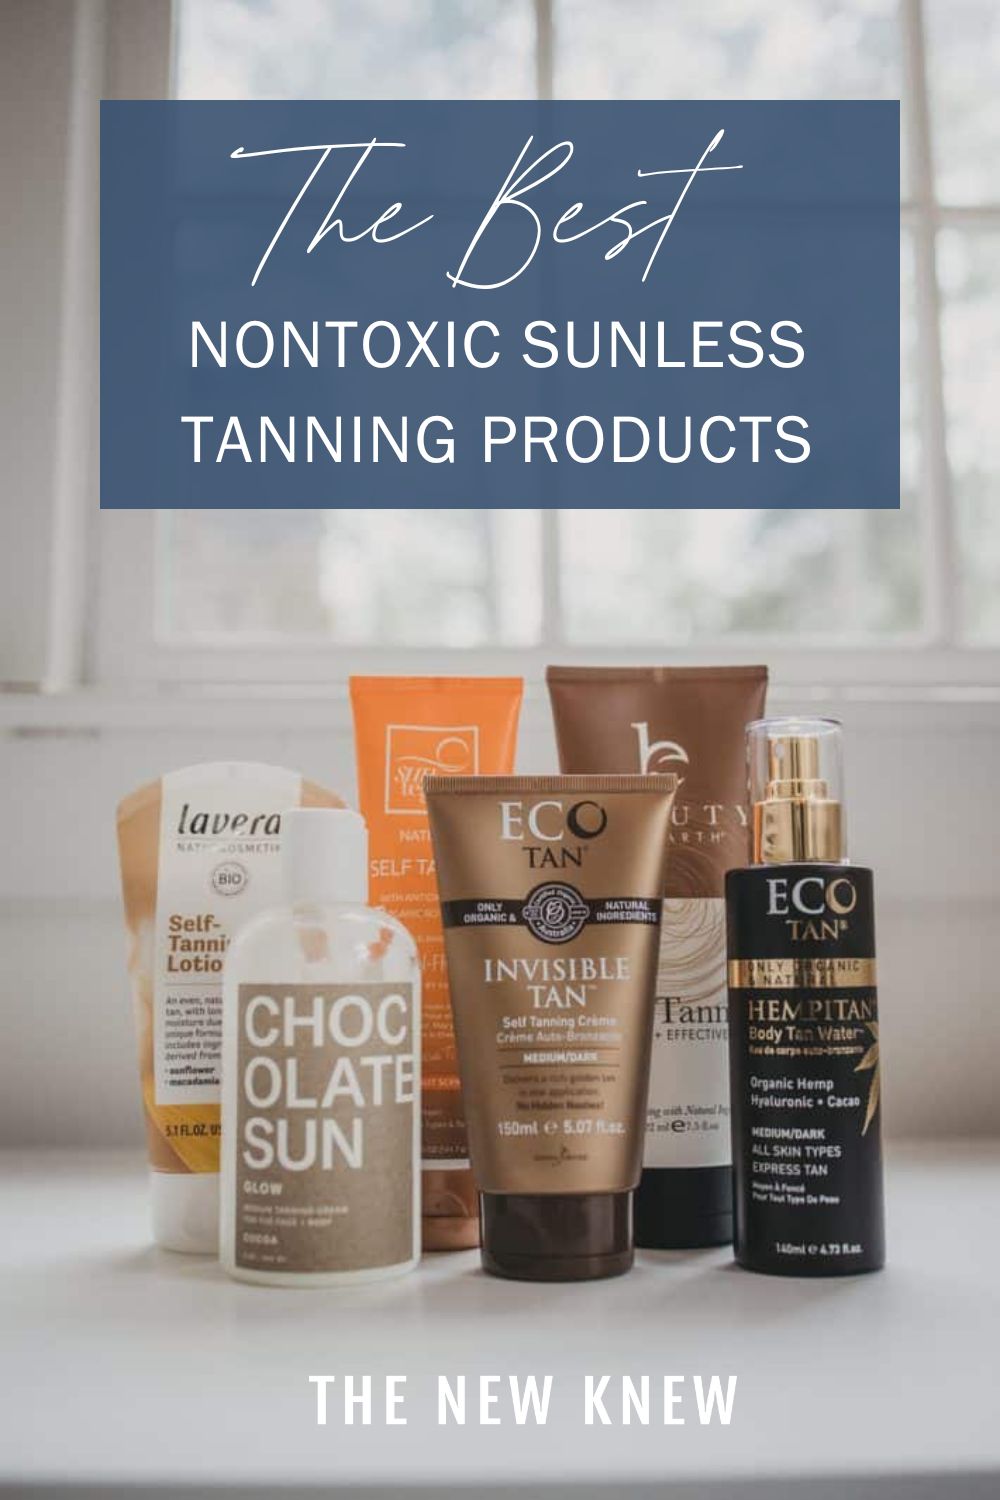 The best sunless tanning products